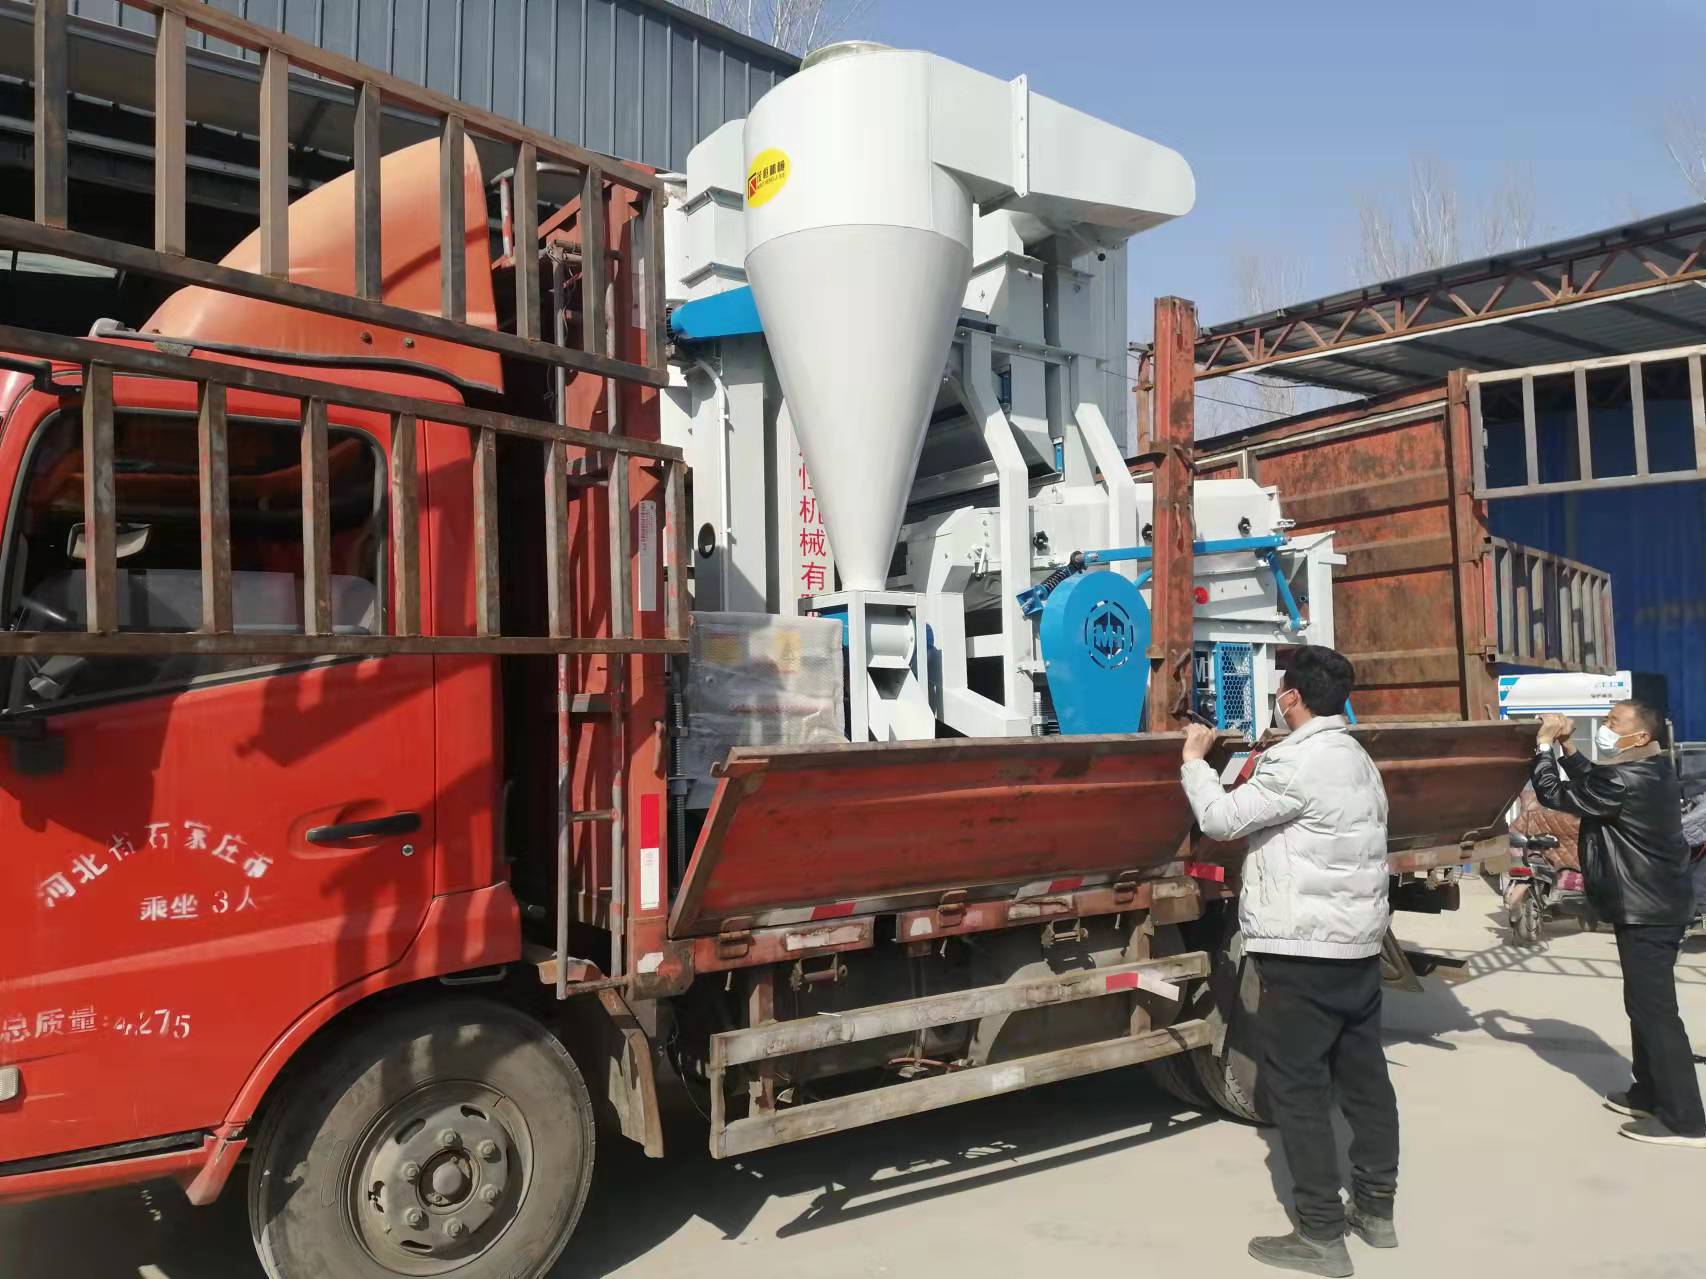 Grain bean cleaning machine low price and high quality.